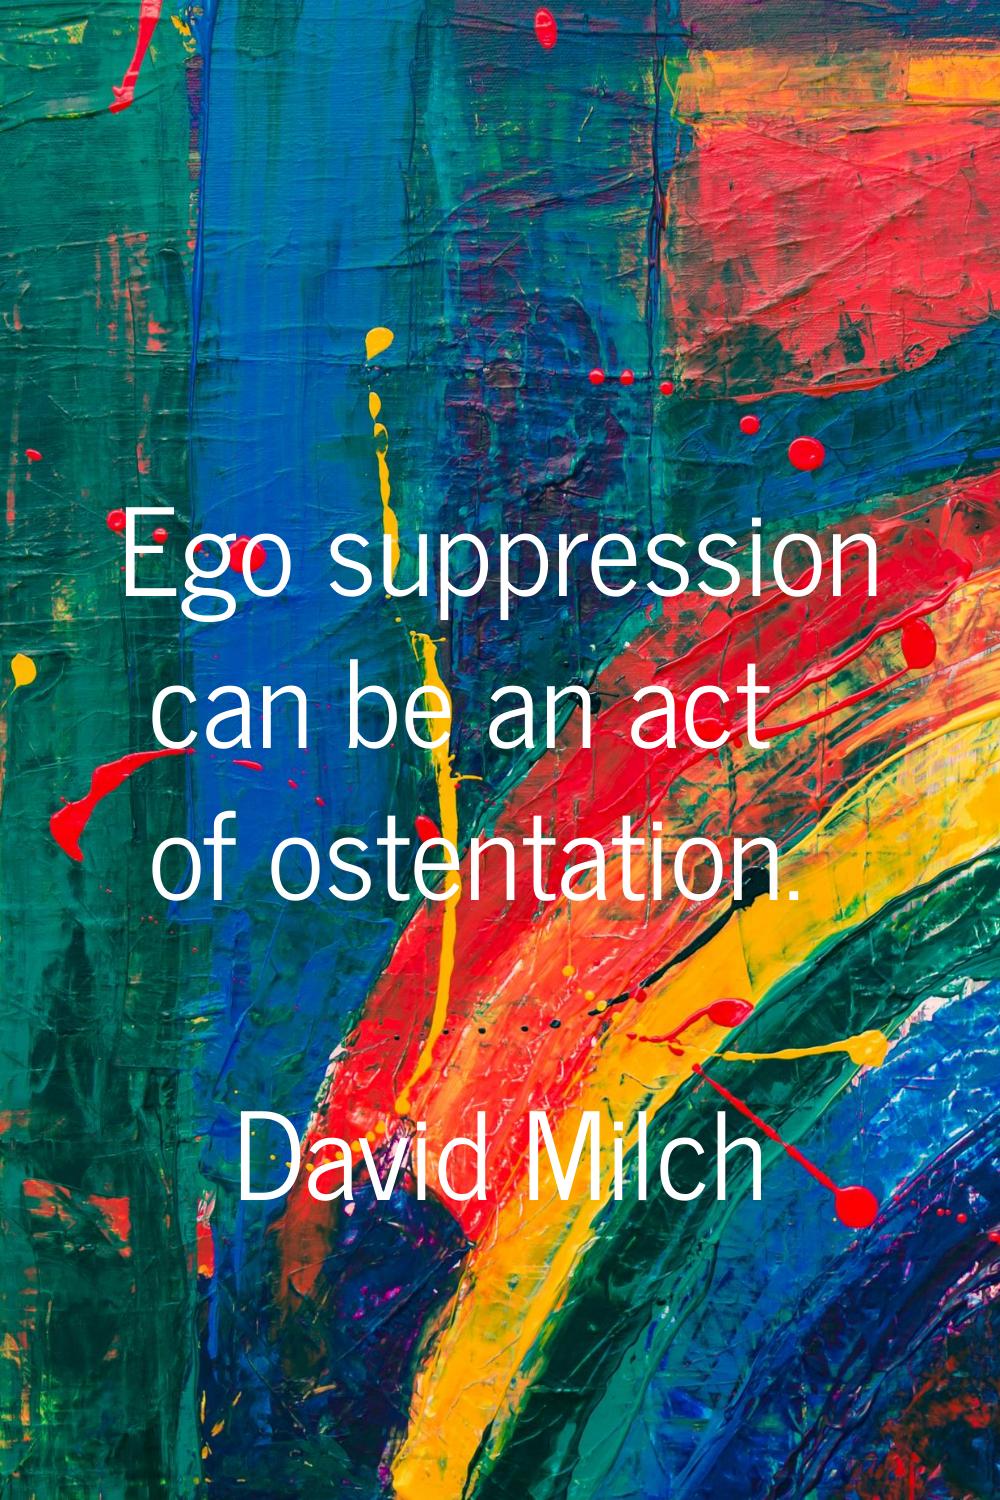 Ego suppression can be an act of ostentation.